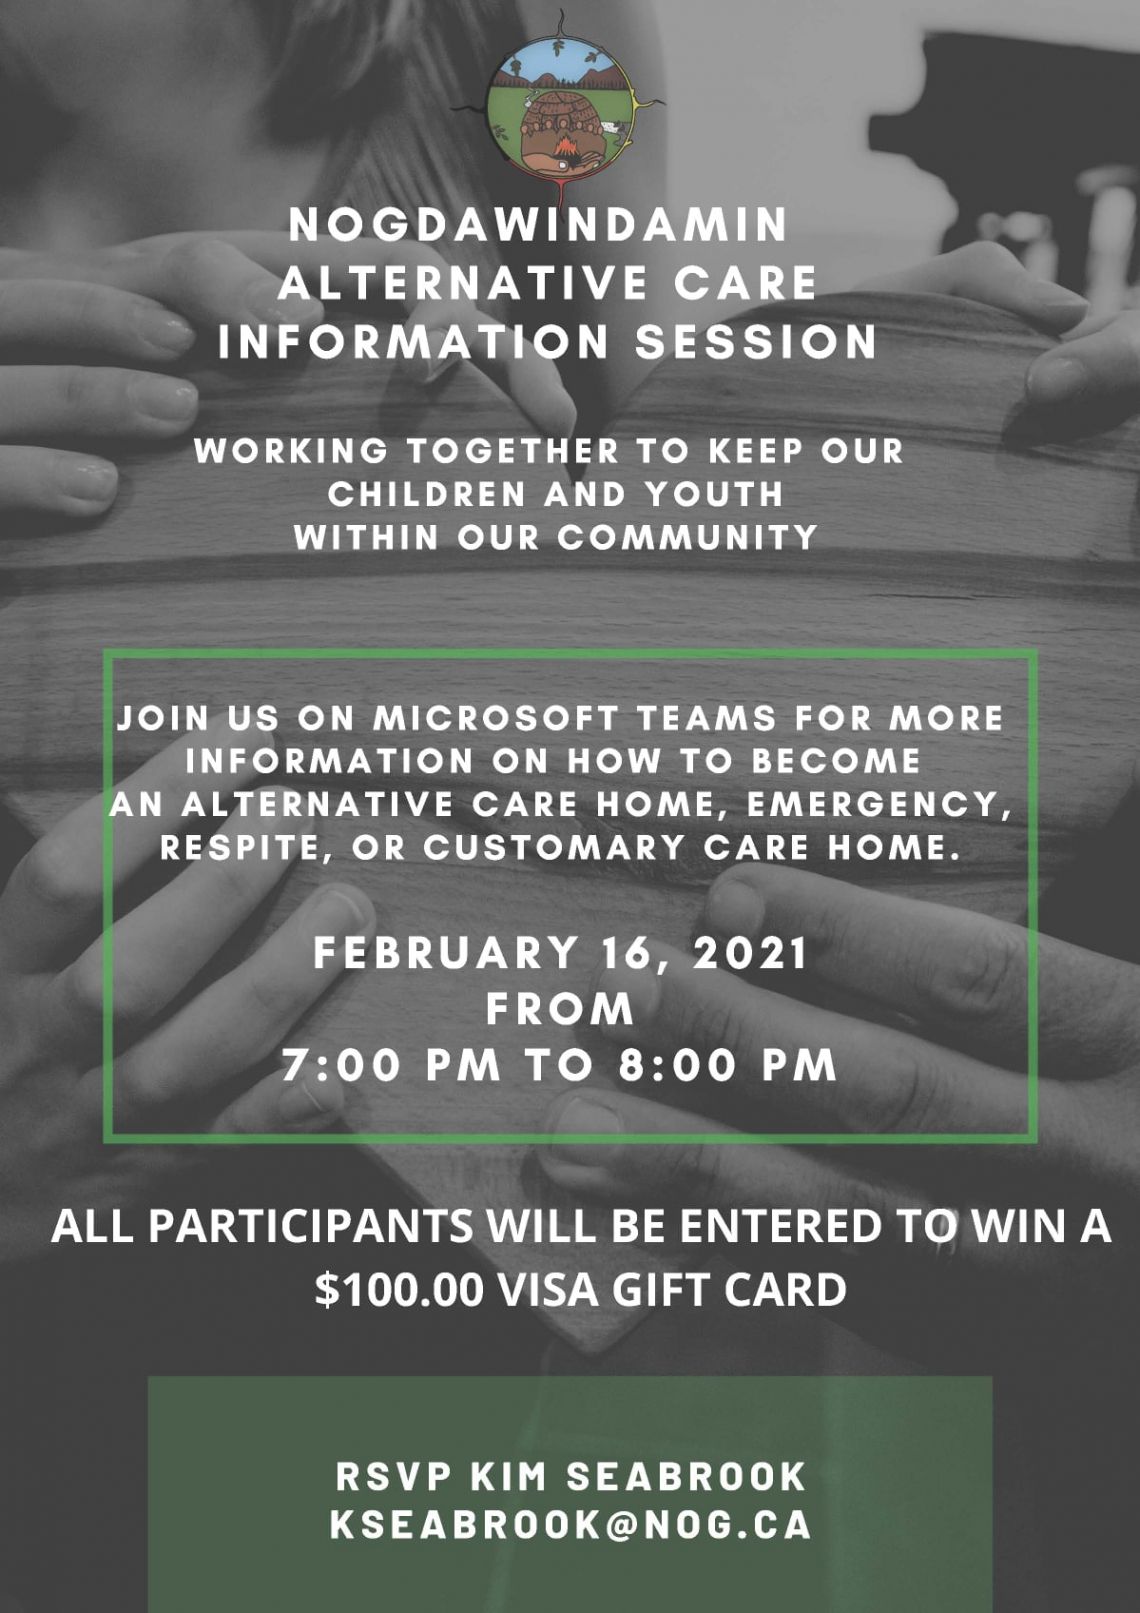 Nogdawindamin Alternative Care Information Session Working Together to Keep our Children and Youth Within our community Join us on Microsoft Teams for more Information on how to become an Alternative Care home, emergency, respite, or customary care home.  Februrary 16 2021 from 7:00pm to 8:00pm All participants will be entered to win a one hundred dollar visa gift card.  RSVP to Kim Seabrook email kseabrook@nog.ca